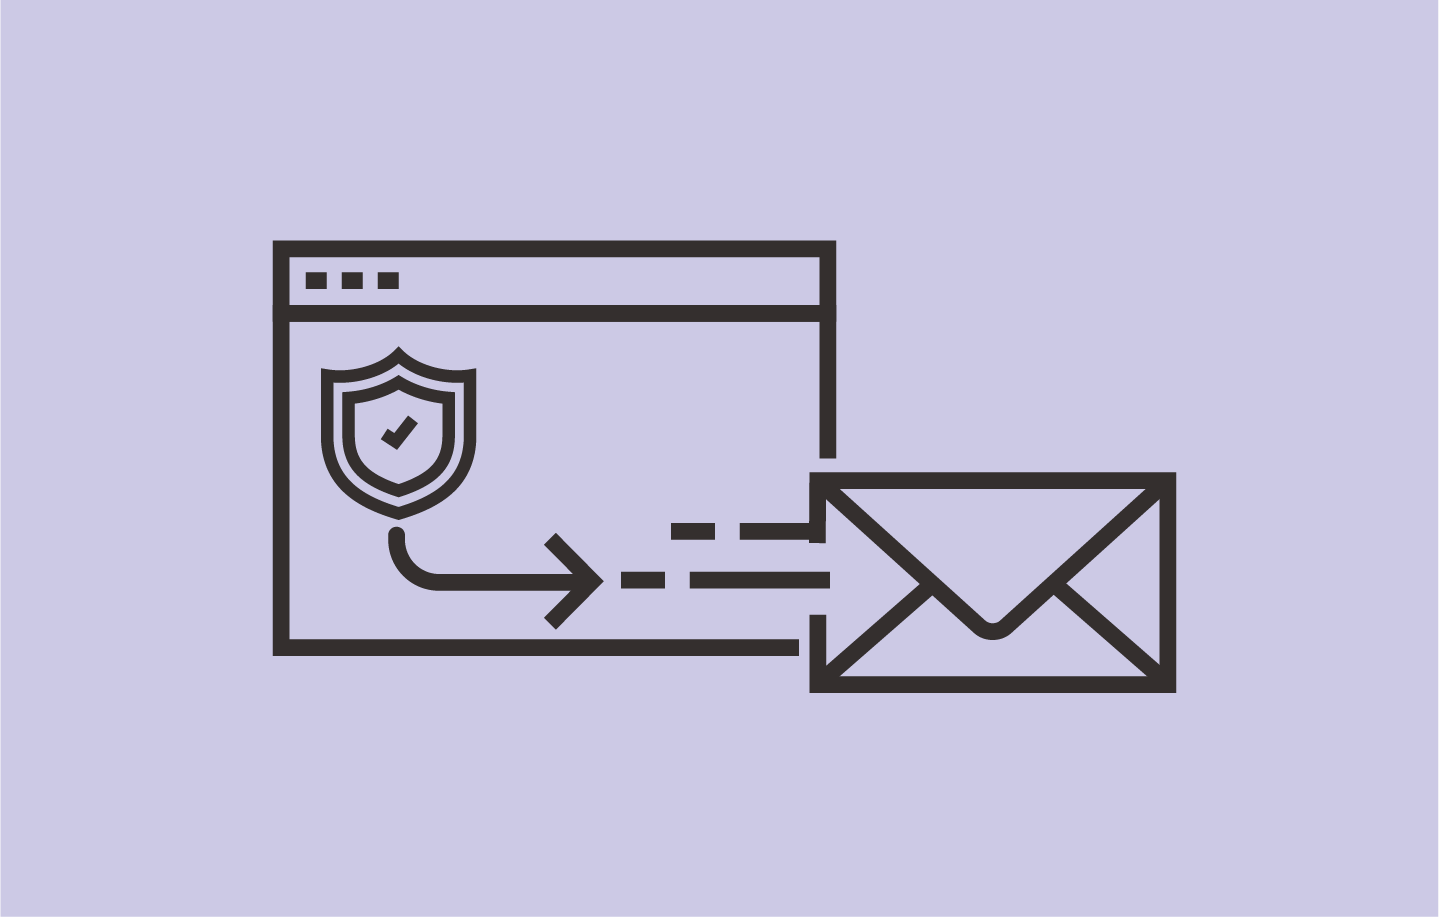 Illustration of a security shield and an email